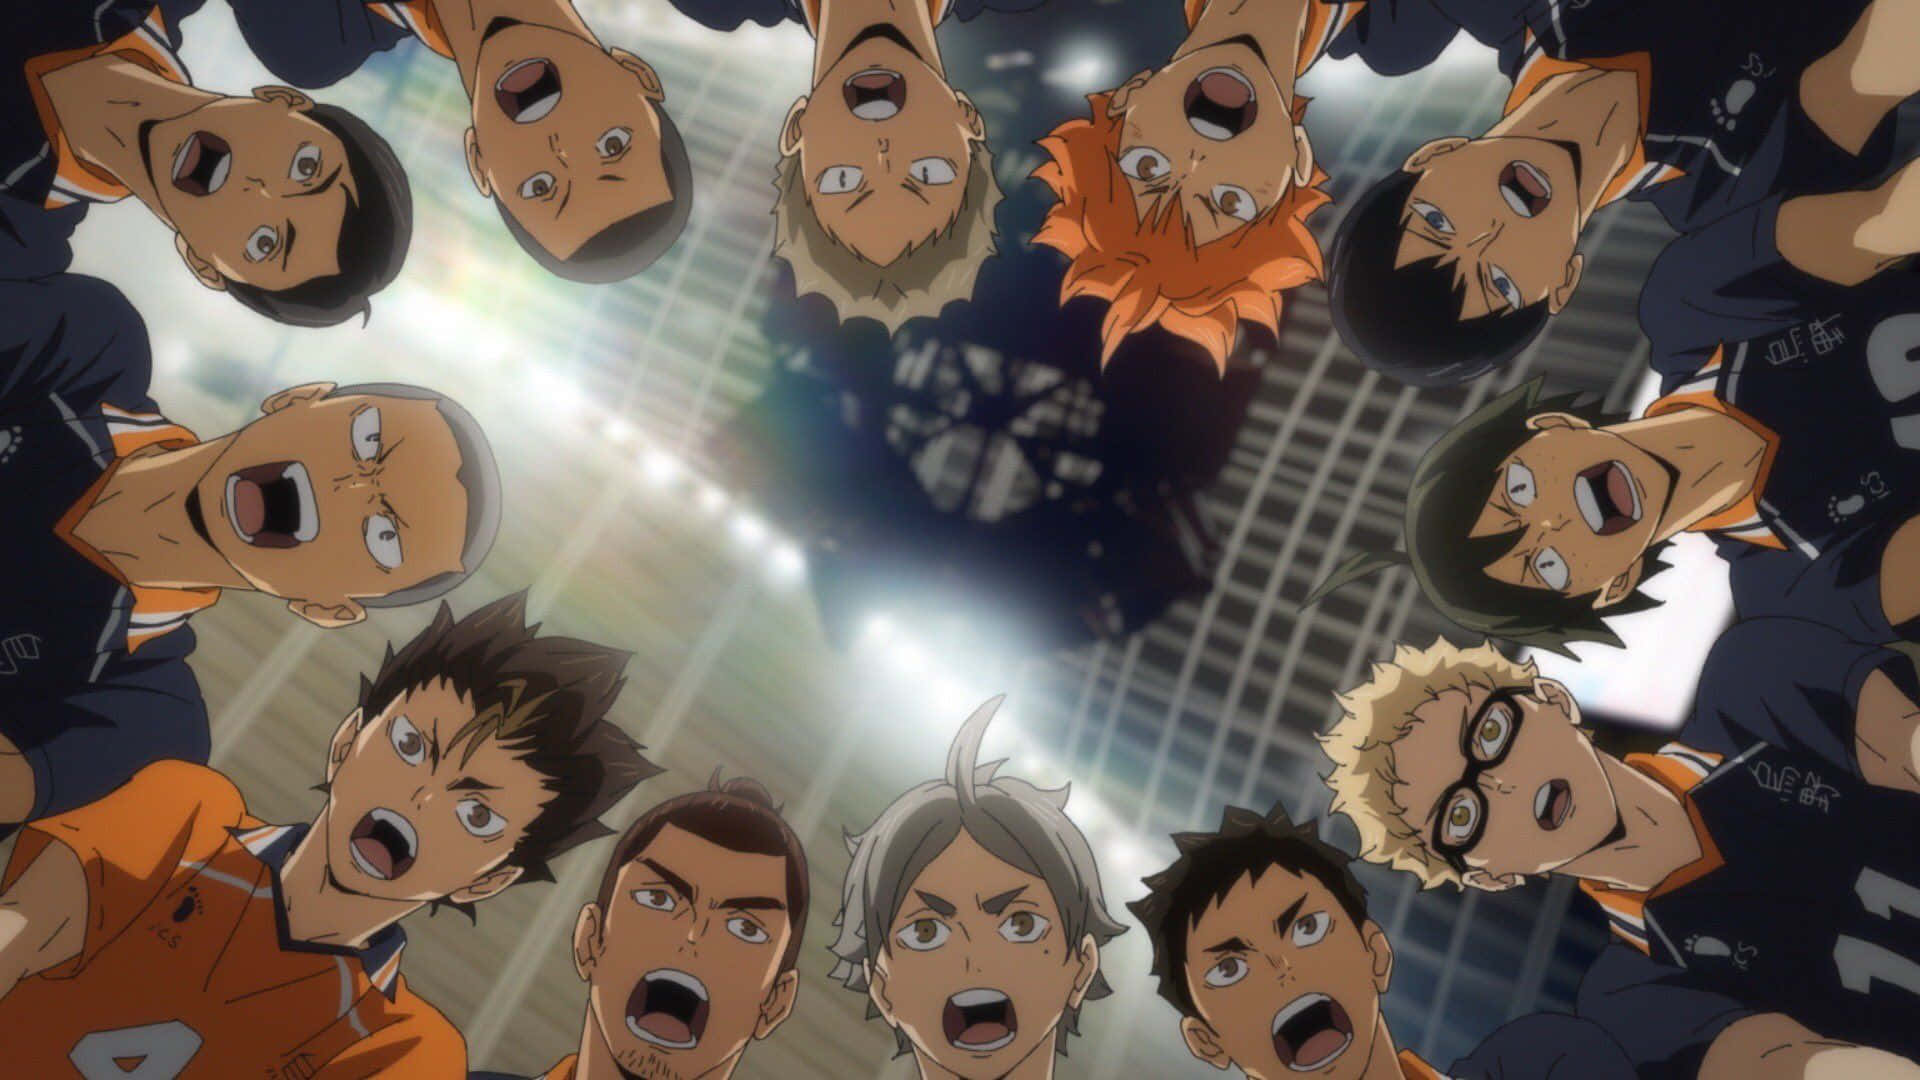 Get Ready to Play with the Haikyuu Laptop Wallpaper